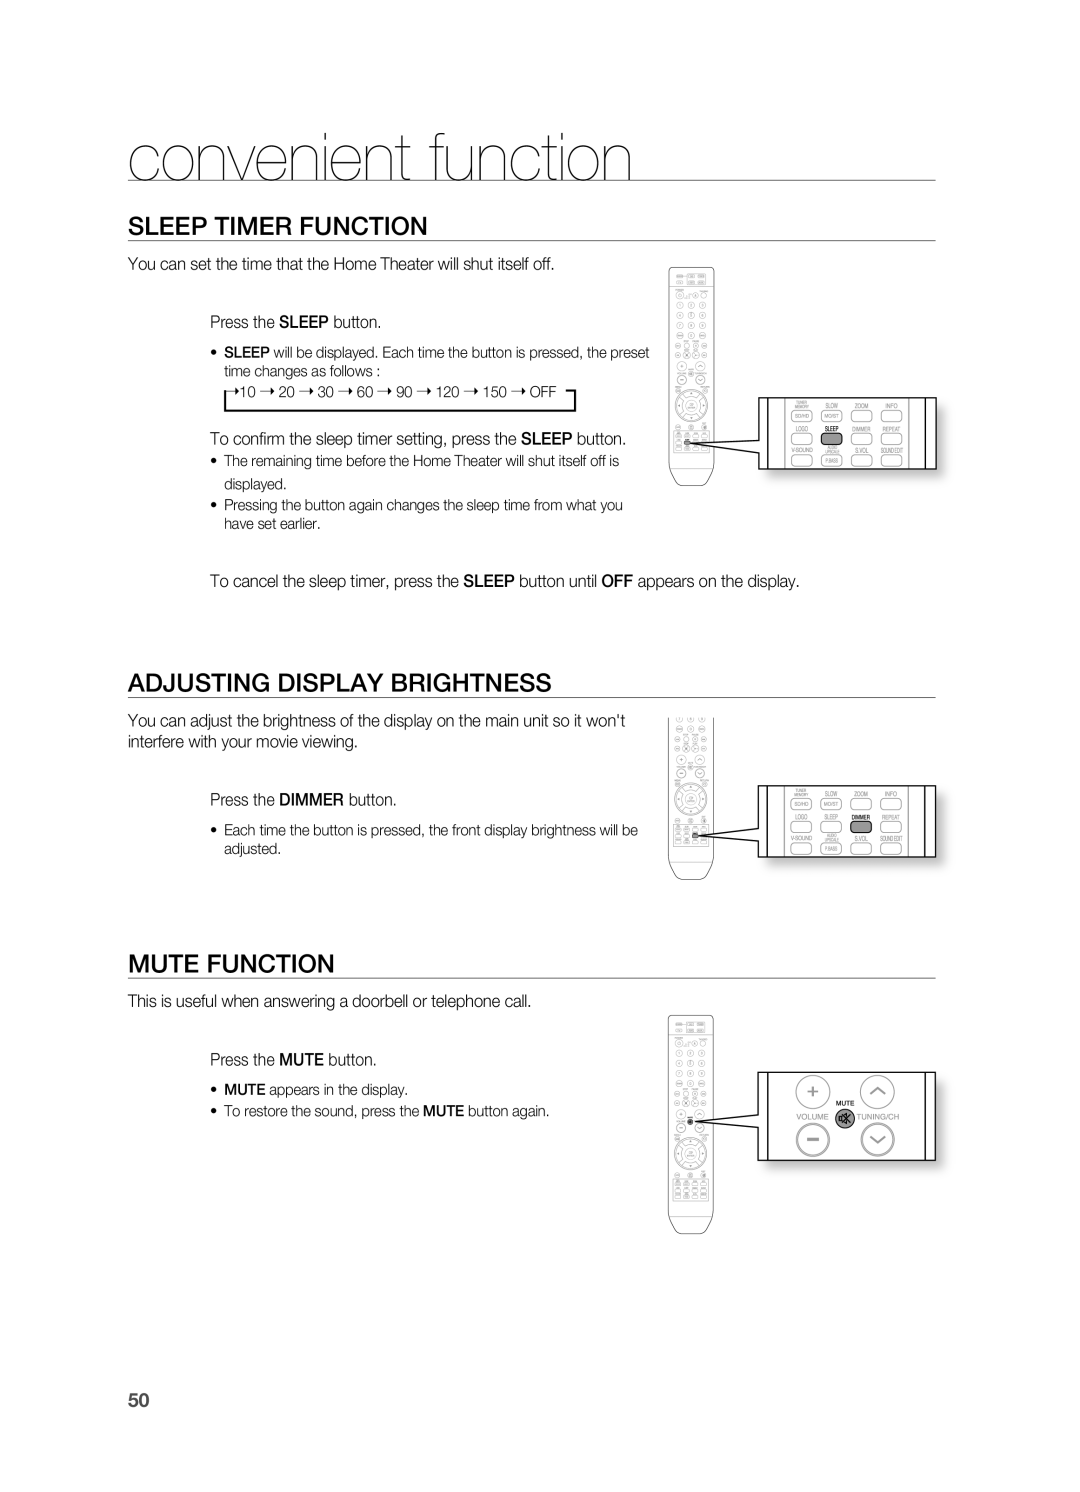 Sony HT-X810 user manual convenient function, SlEEP TIMEr FUNCTION, ADJUSTING DISPlAY BrIGHTNESS, Mute Function 